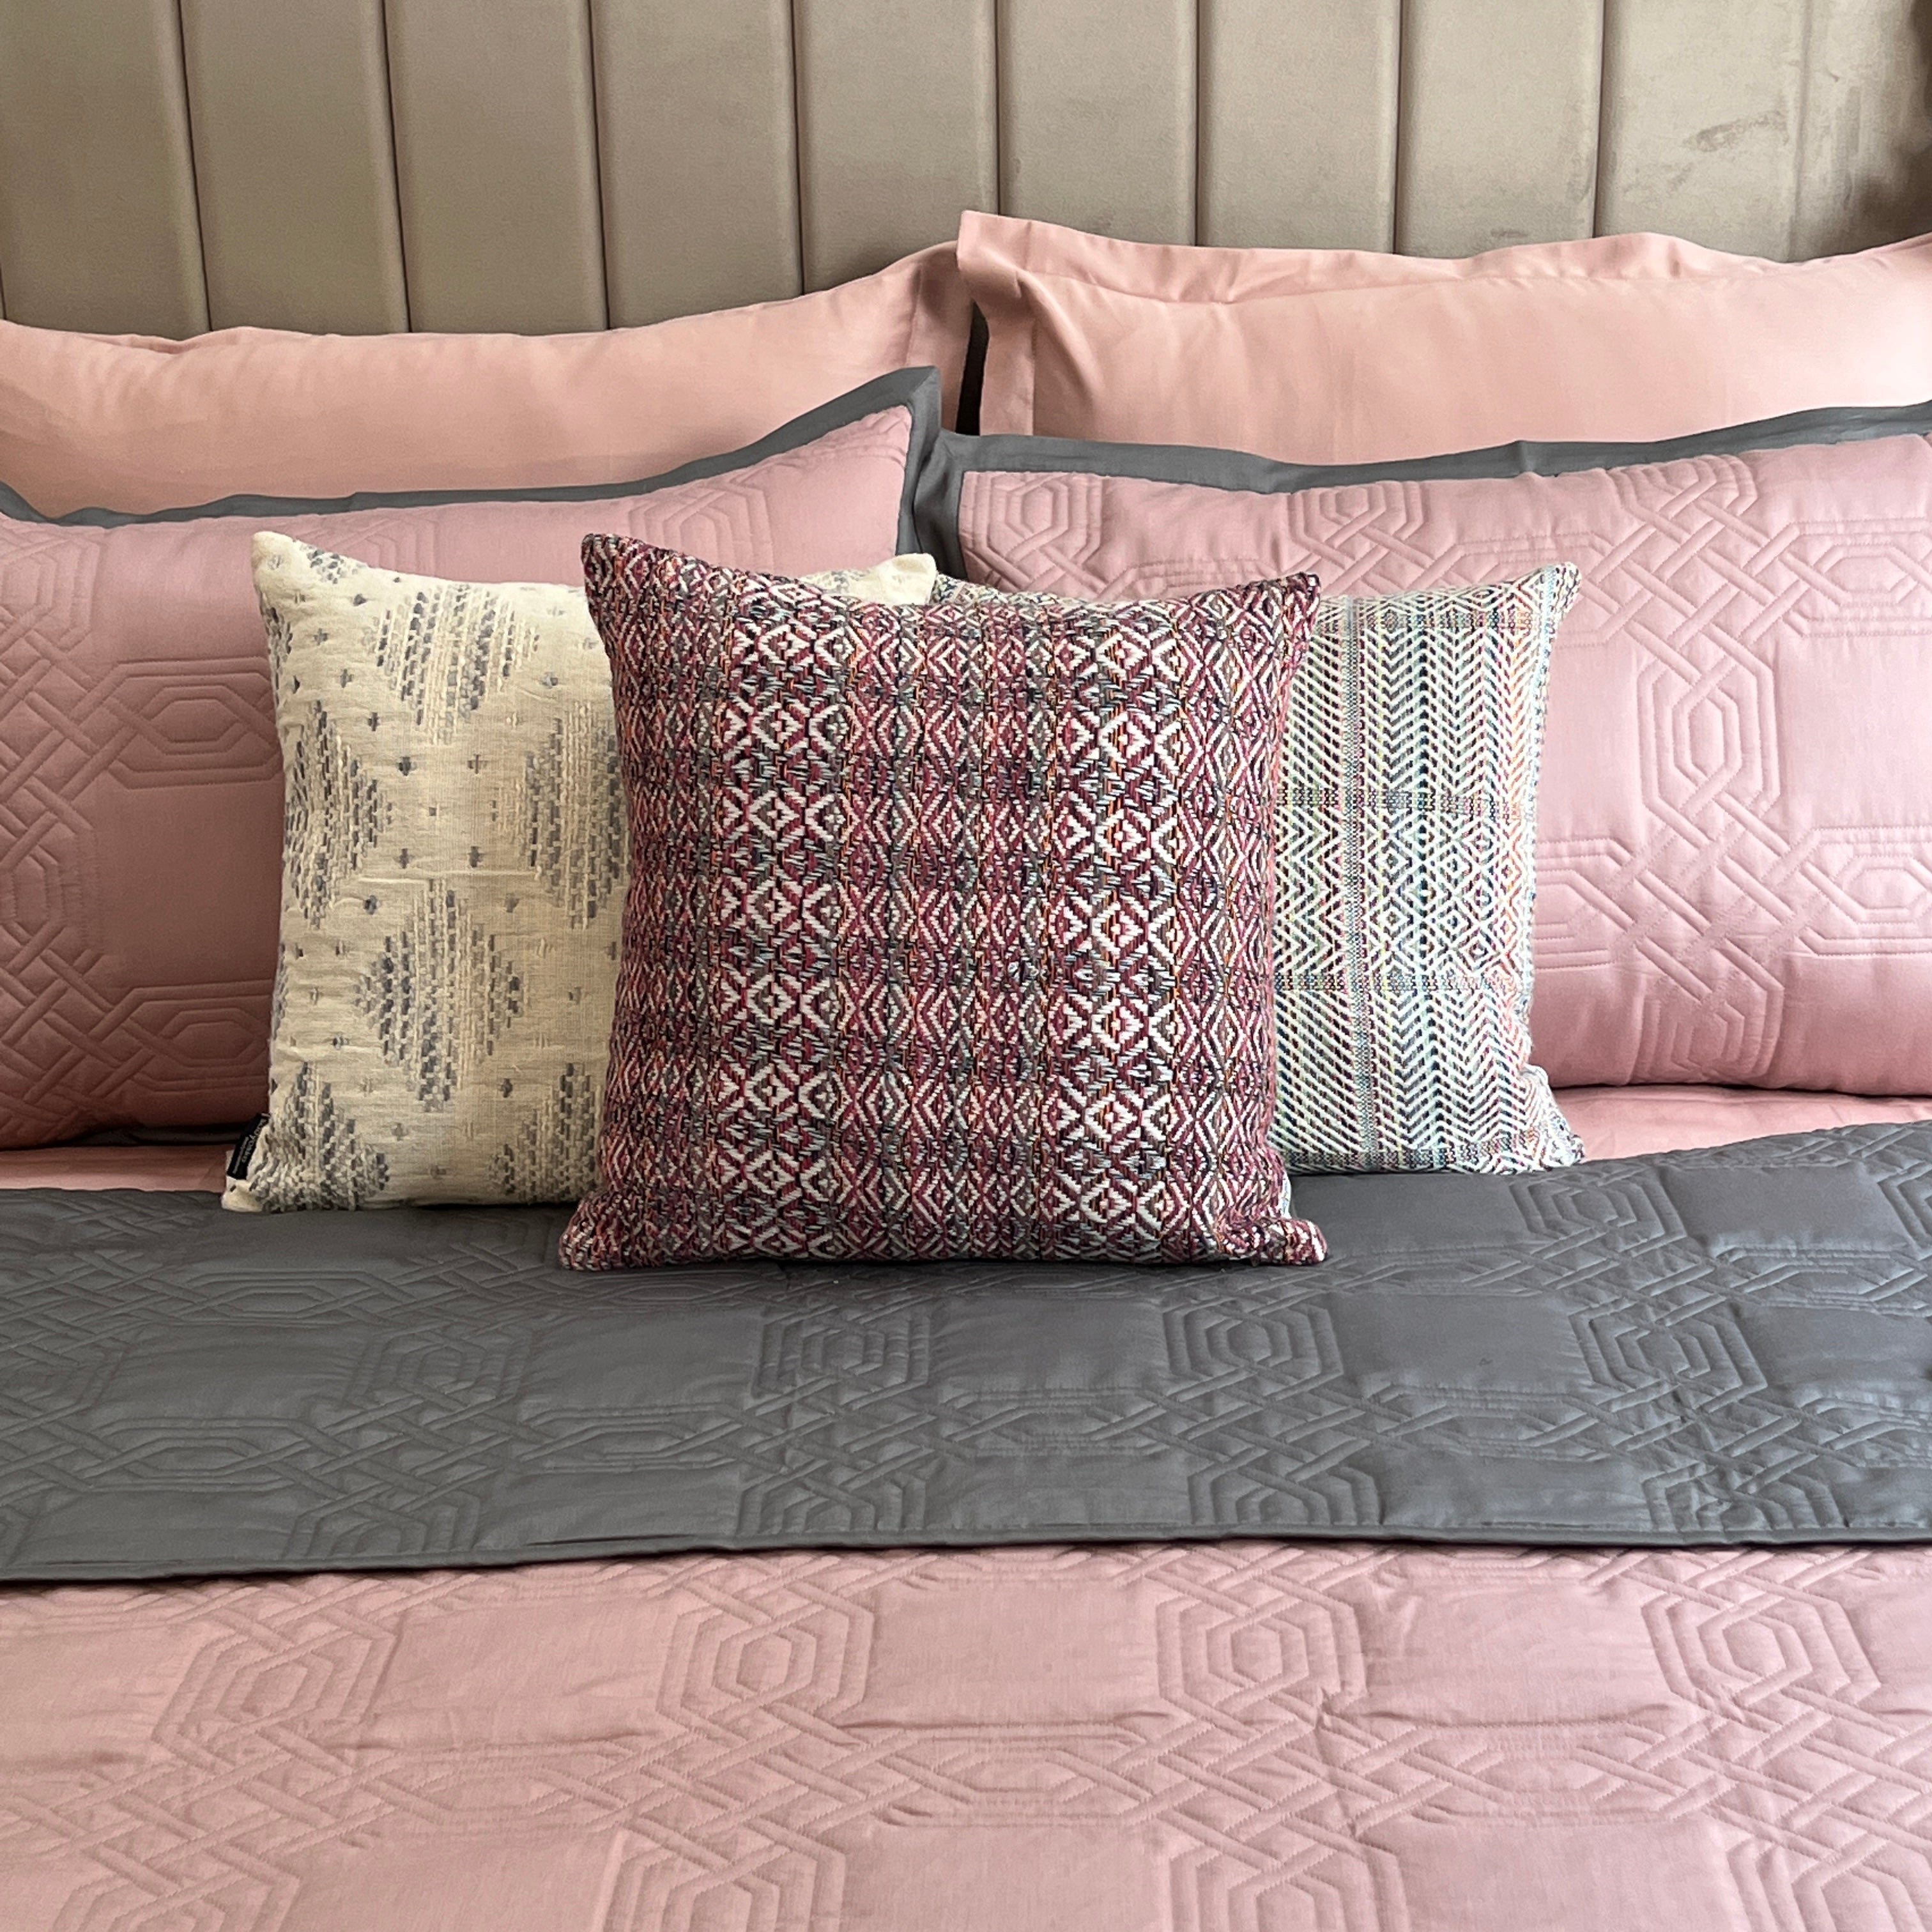 Quilted Old Rose and Dark Grey Ornate Reversible Bedspread